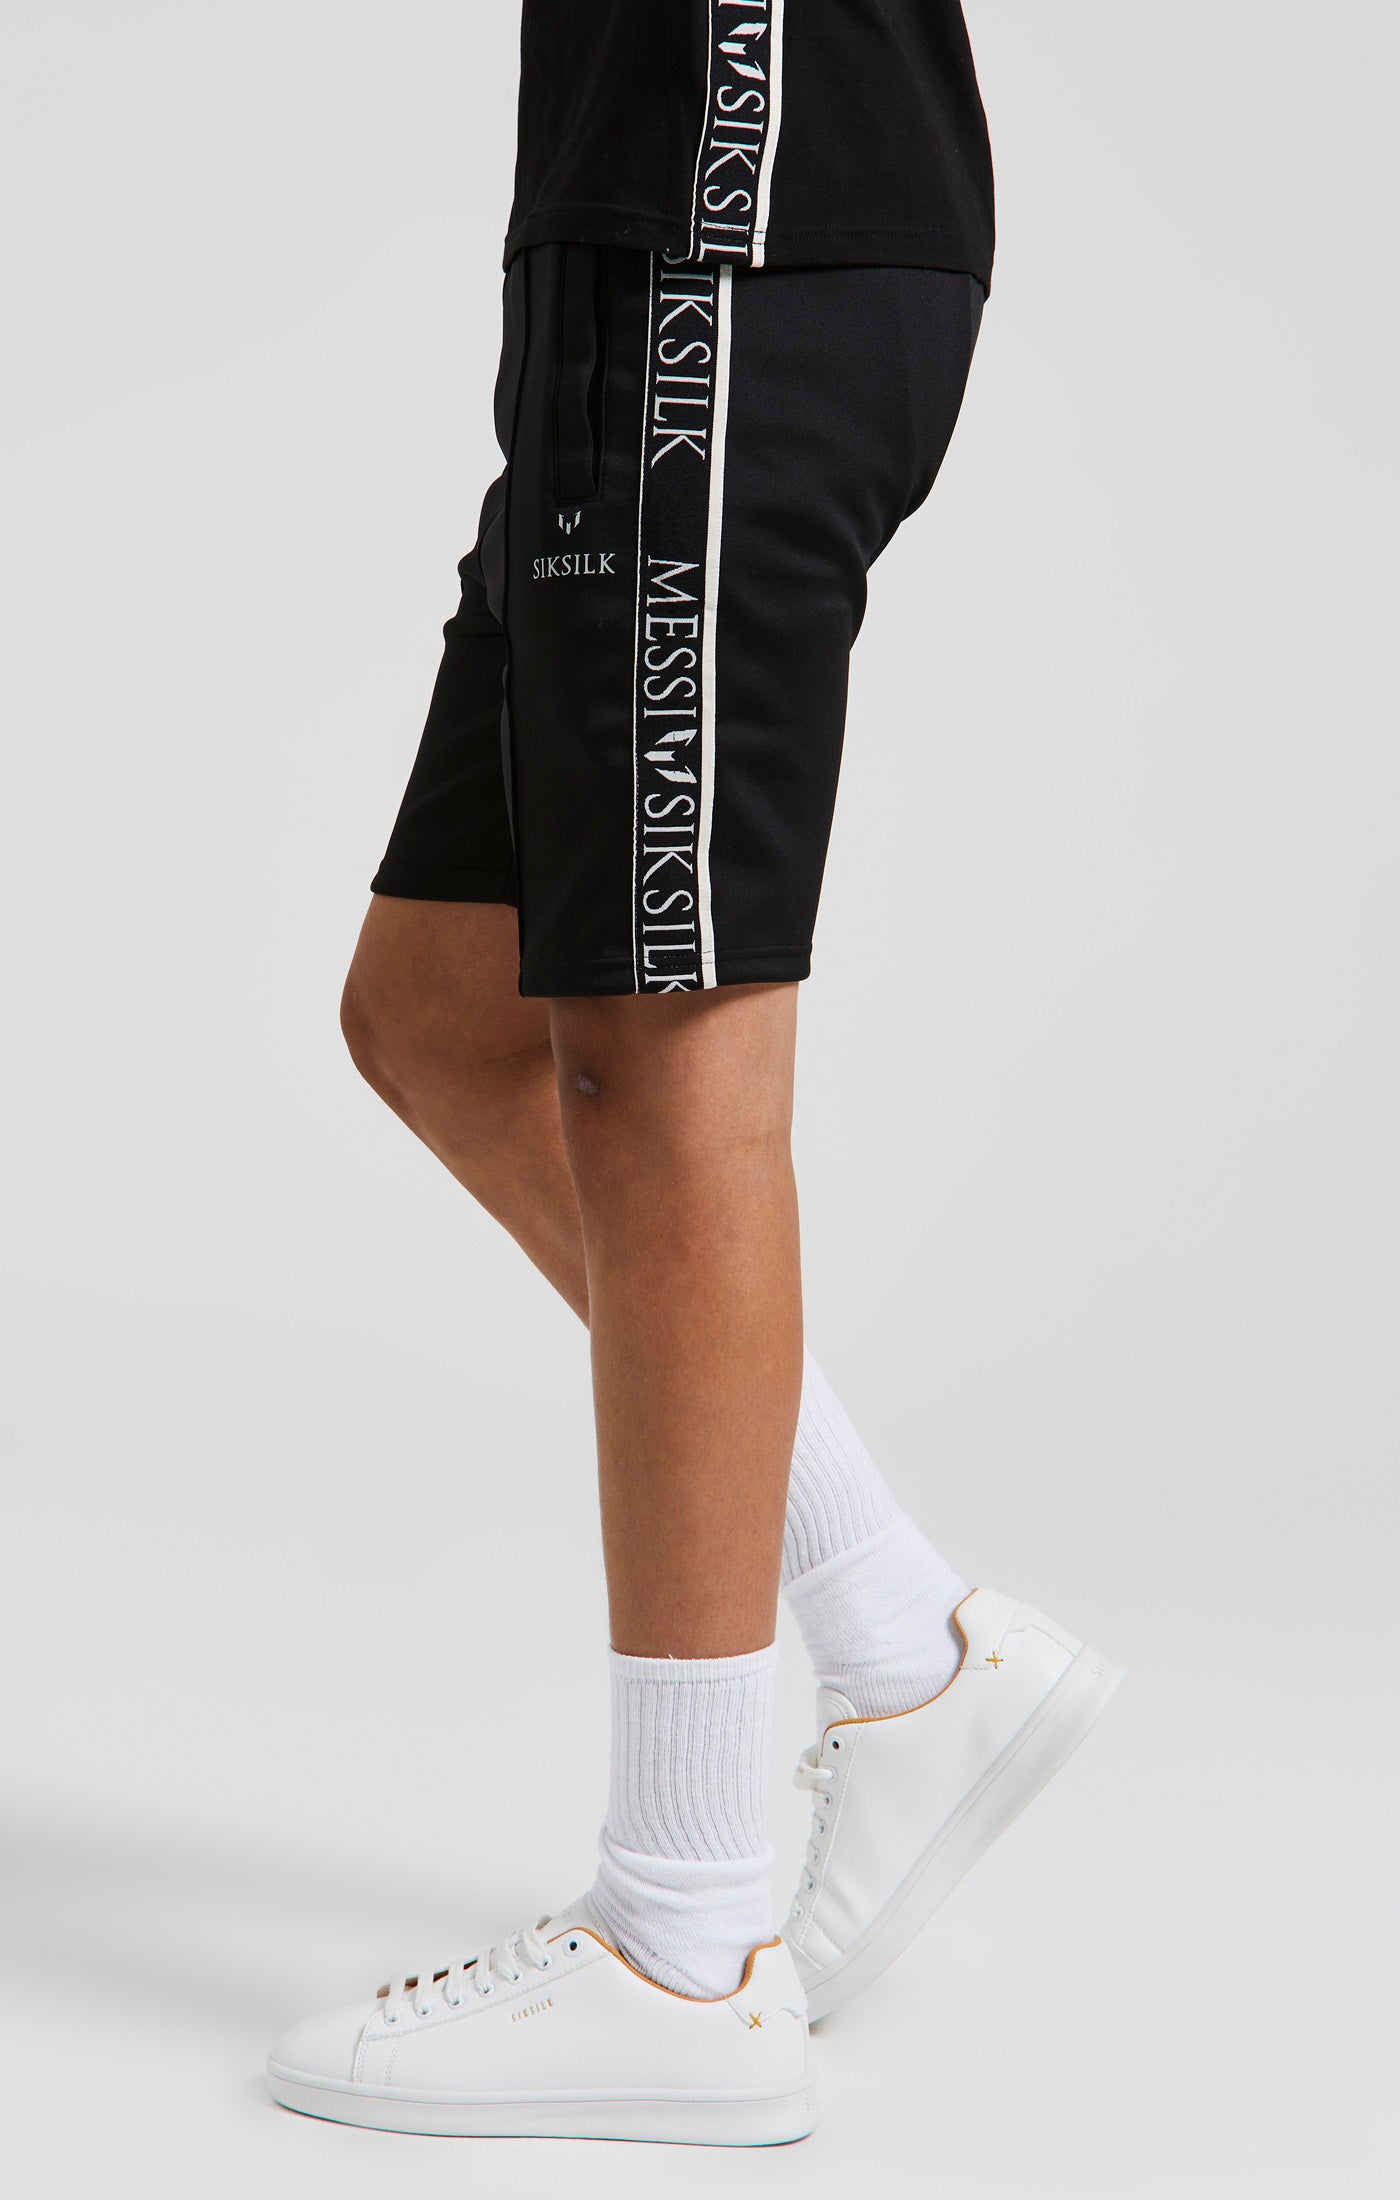 Load image into Gallery viewer, Boys Messi x SikSilk Black Taped Short (1)